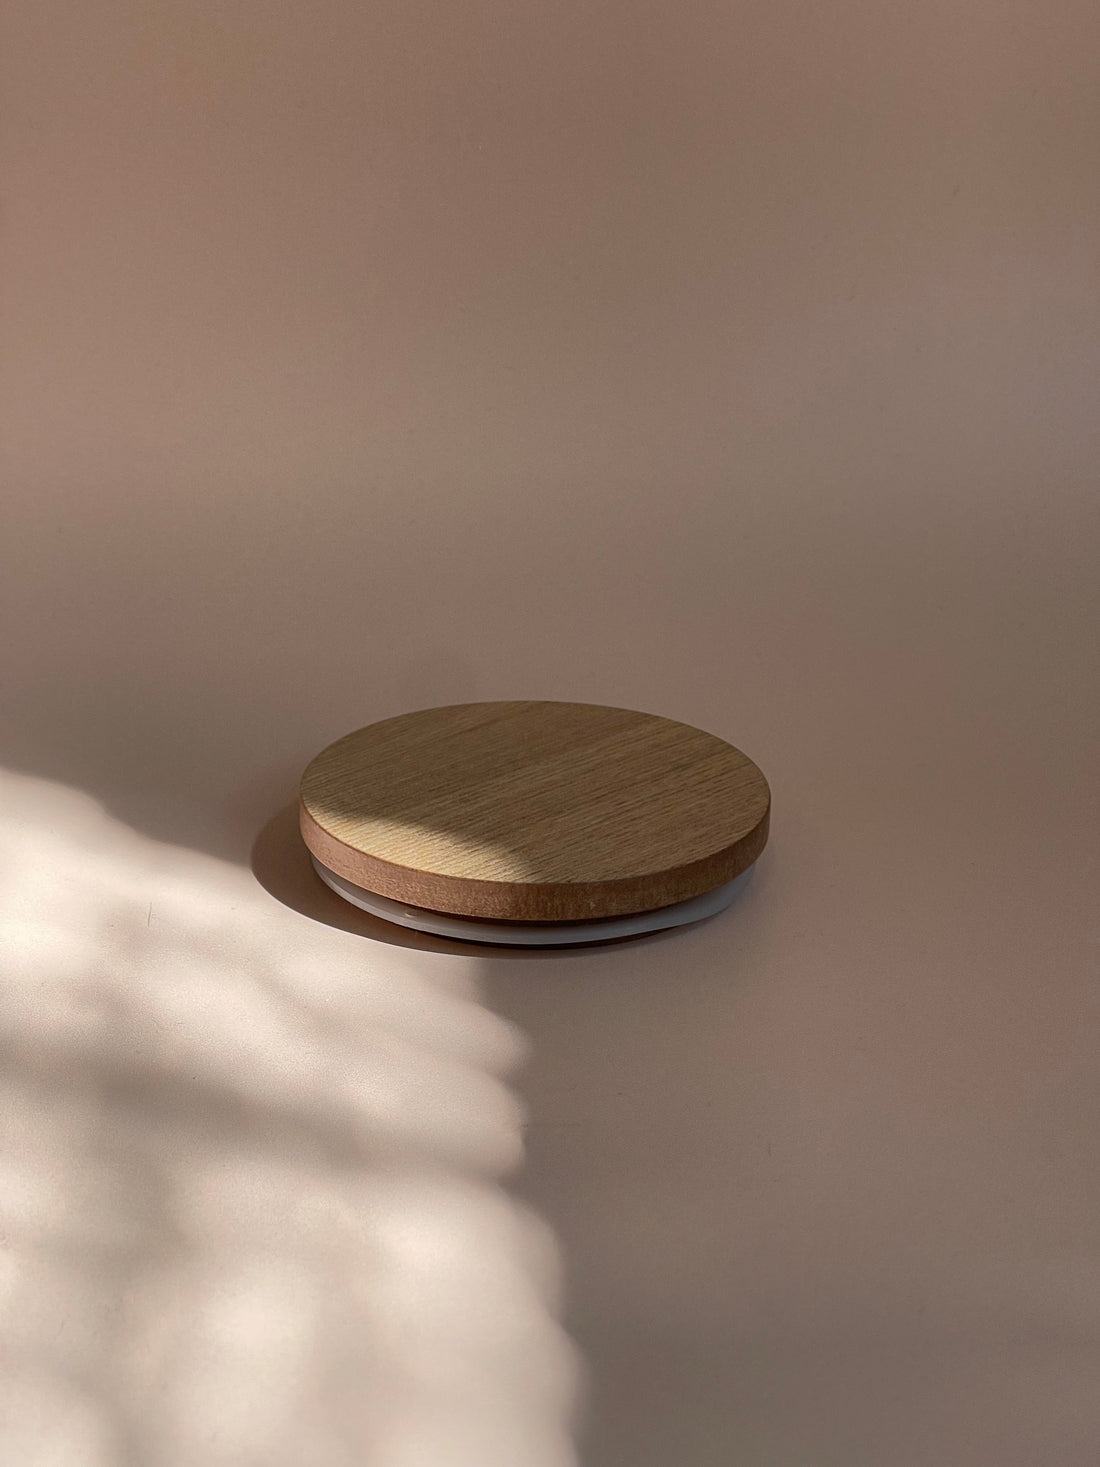 A close-up image of a wooden candle lid, showcasing a natural grain pattern with a smooth finish.